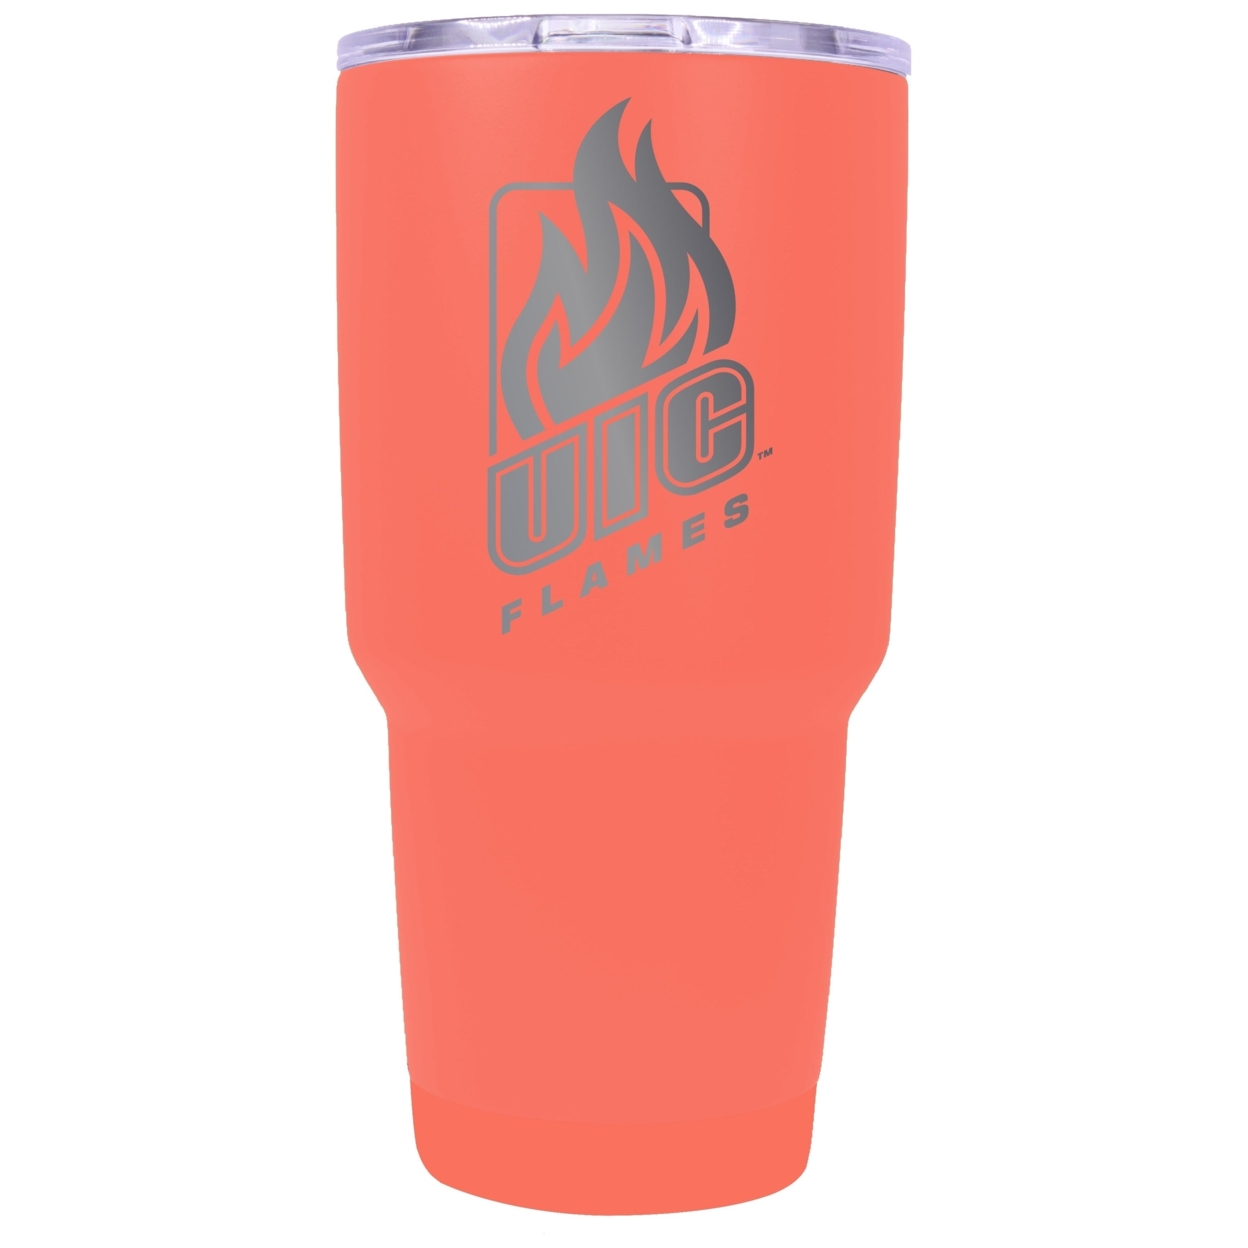 University Of Illinois At Chicago 24 Oz Laser Engraved Stainless Steel Insulated Tumbler - Choose Your Color. - Coral